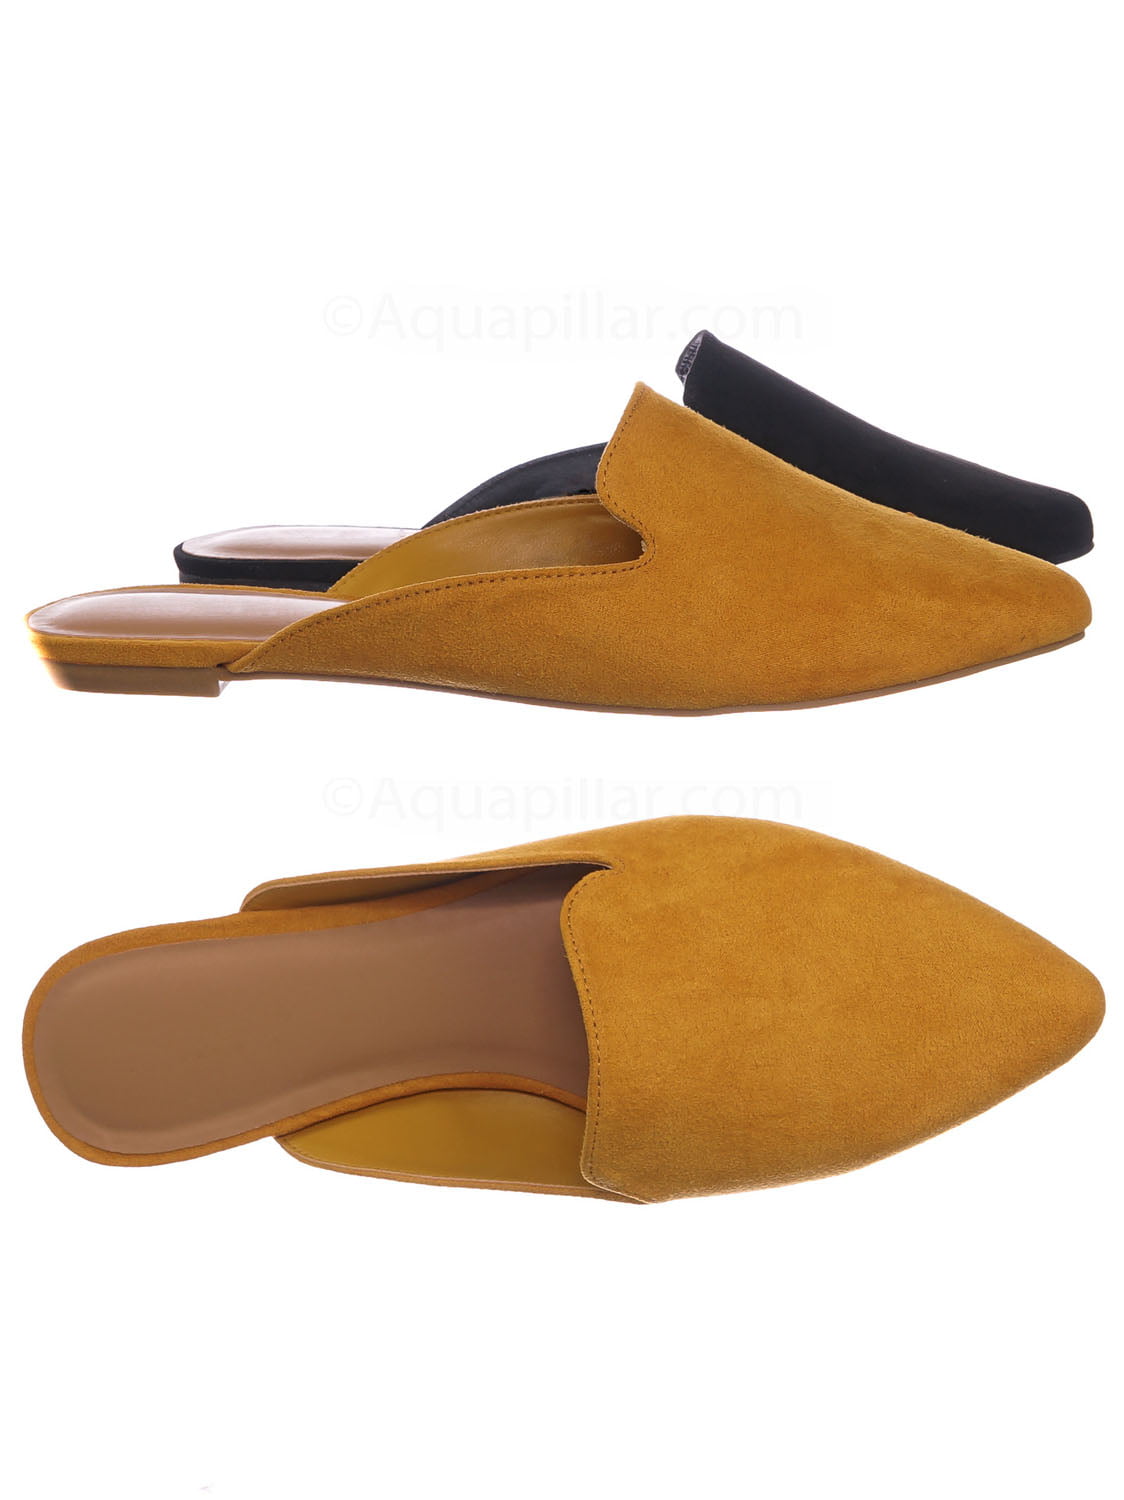 Blog44 by Bamboo, Slip On Mule Slippers - Women Flat Backless Pointed Toe  Pump 